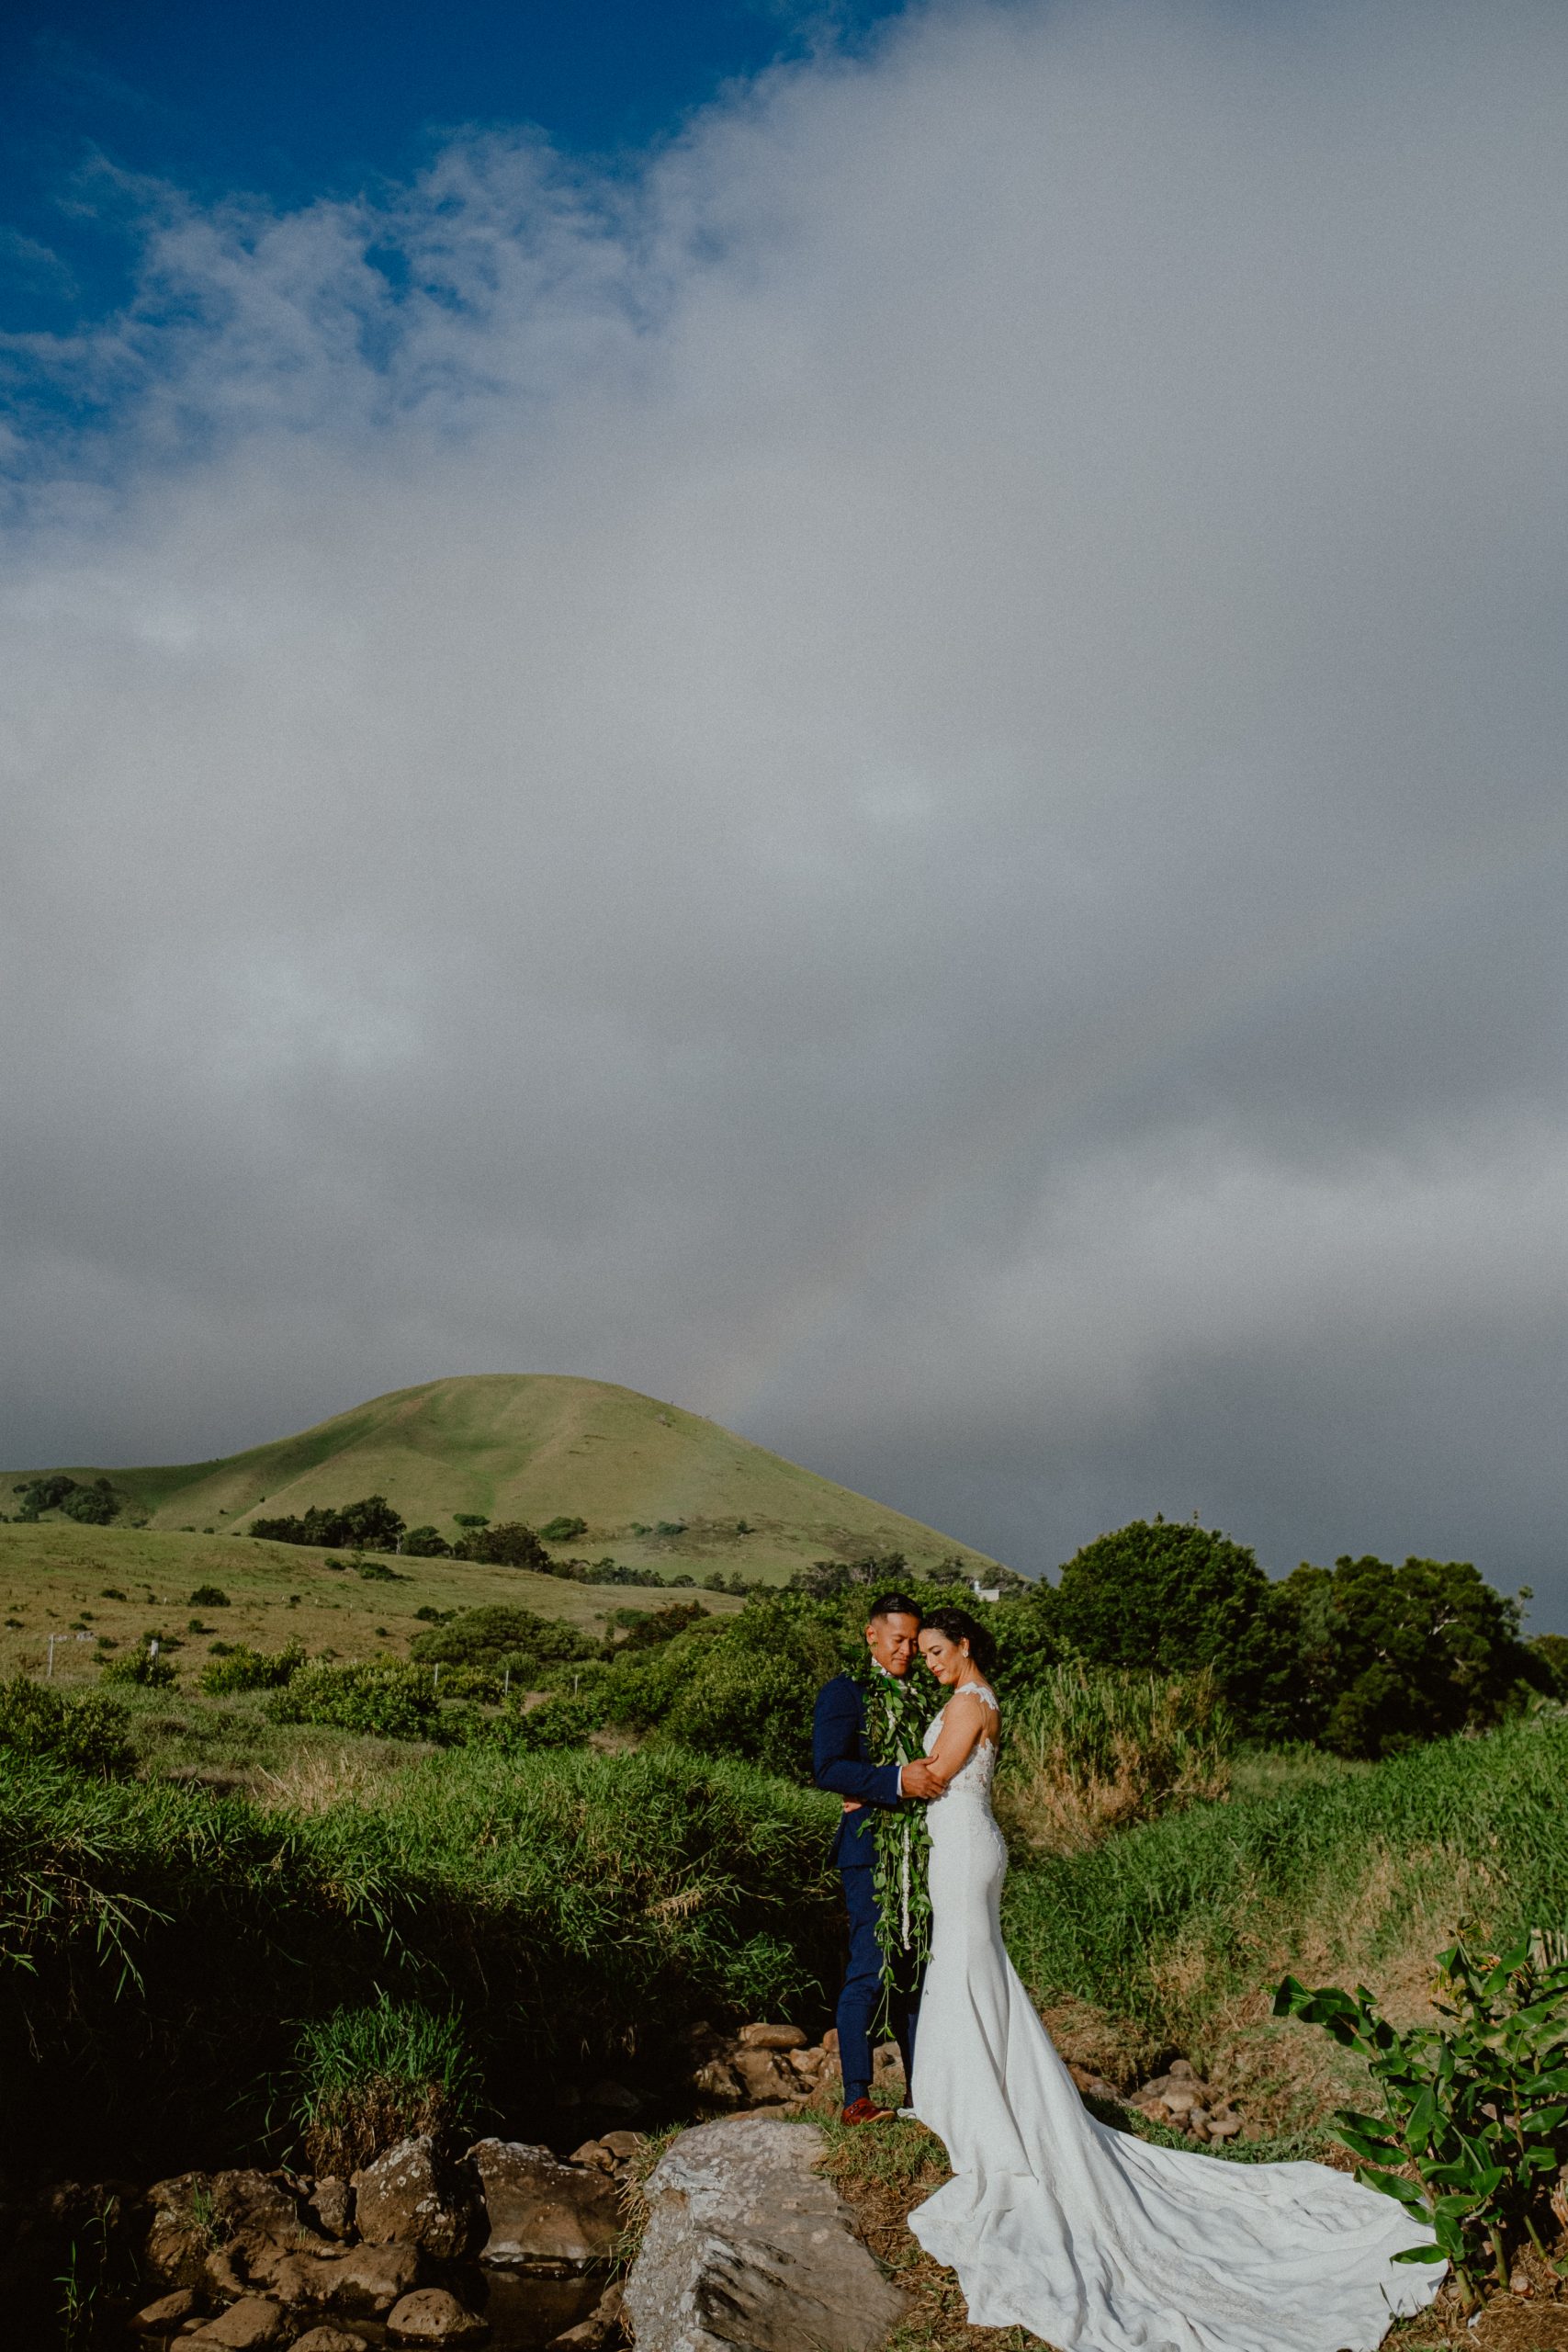 Newlywed photography inspiration of Hawaii Fall photography with rainbow over the hill at Fall wedding day photography inspiration | Big Island Elopement, Hawaii Elopement Photographer, Hawaii Elopement and Wedding Inspiration, Hawaii Elopement ideas, Big Island Wedding Inspiration, Fall Hawaiian Wedding Ideas, Fall Wedding Inspiration, Hawaii Outdoor Wedding Ideas | chelseaabril.com